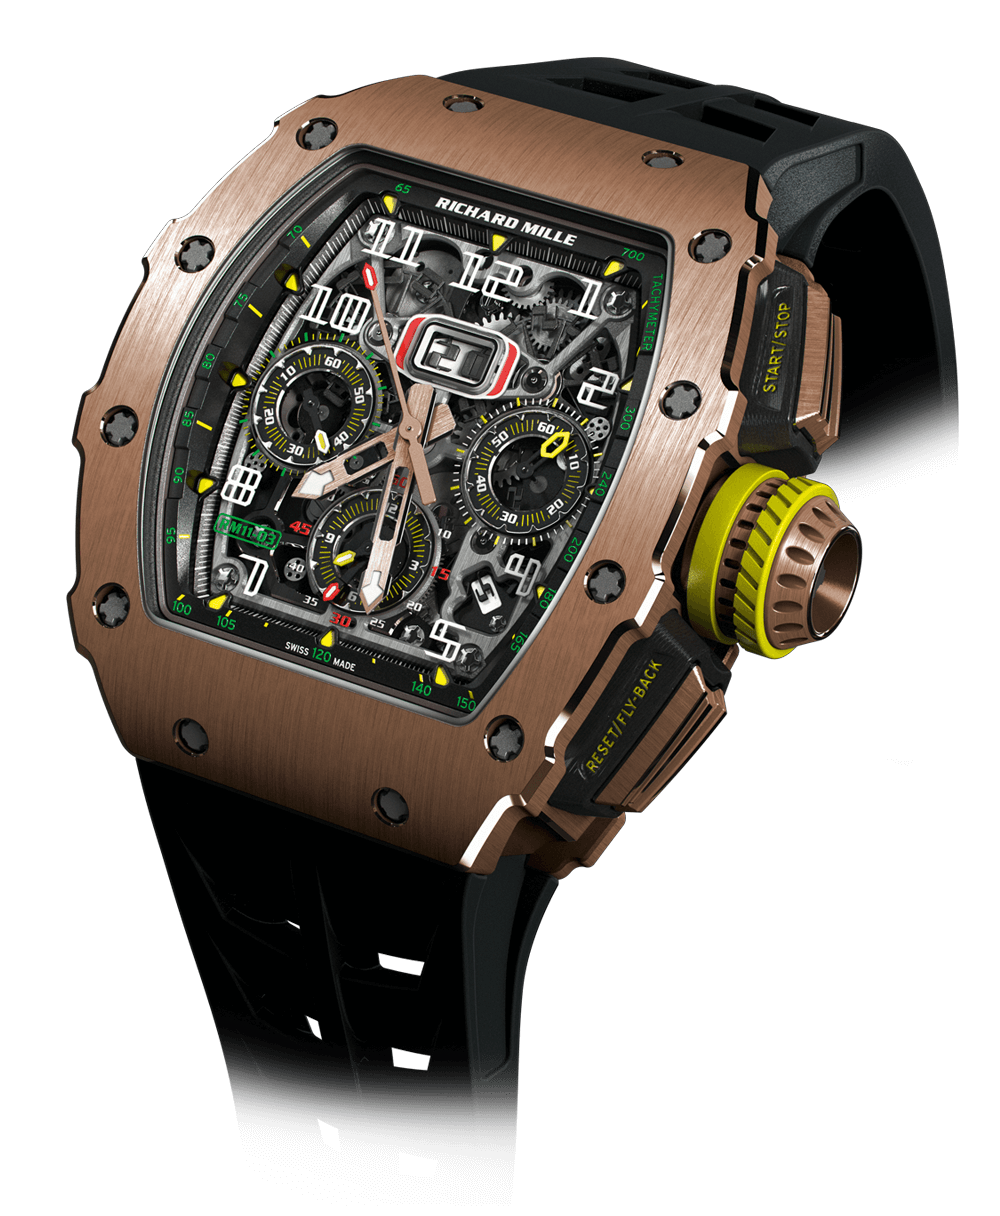 sirene beschaving Roux RICHARD MILLE RM RM 011 RM 11-03 Flyback Chronograph: retail price, second  hand price, specifications and reviews - AskMe.Watch